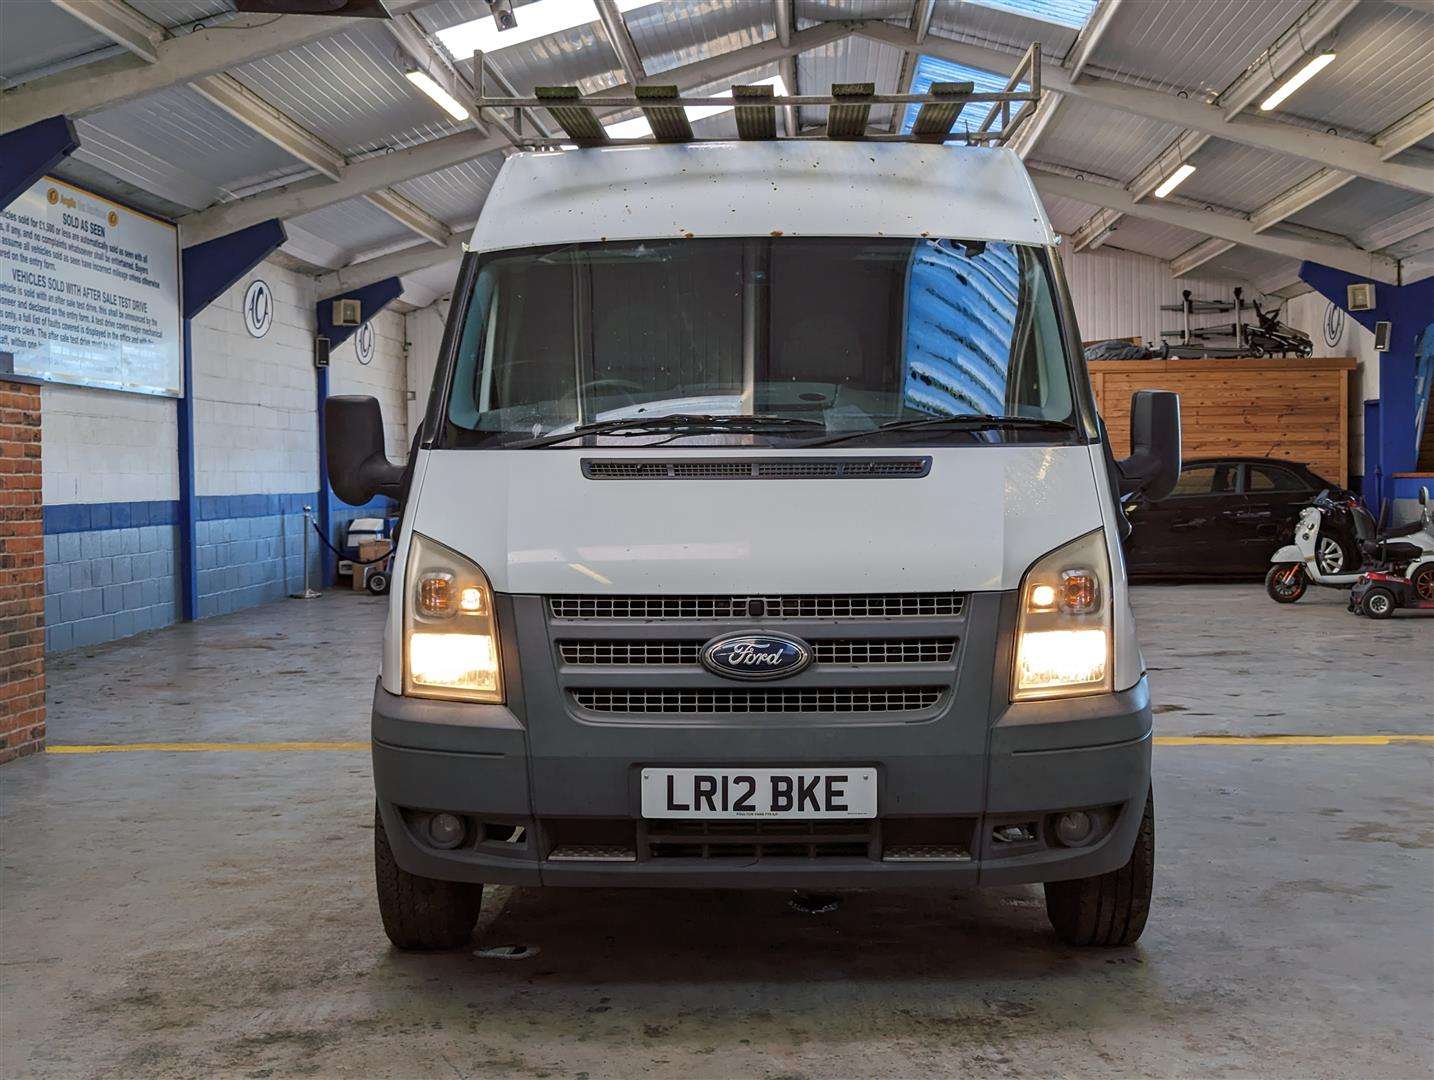 <p>2012 FORD TRANSIT 140 T330 FWD</p>